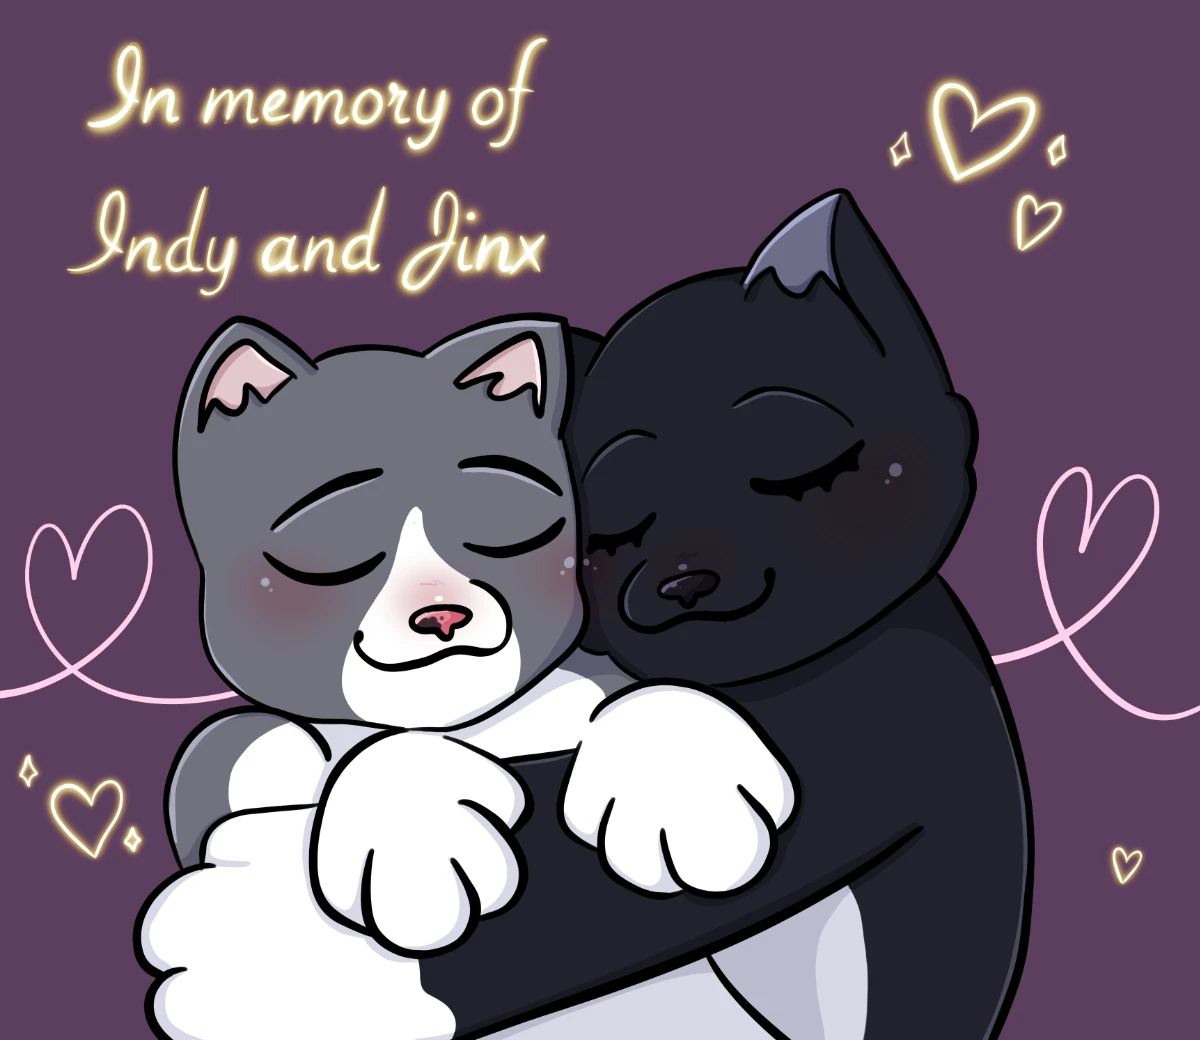 An illustration of two cats, eyes closed, softly smiling, and holding each other with their white paws. The first cat is grey and white with blushing cheeks, pink inner ears, and a pink nose, which has a small grey splotch on the right side. The second cat is black and white with blushing cheeks and dark grey inner ears. They in front of a solid royal purple background decorated with line-art hearts, two in pink and the others in a glowing gold. The words "In memory of Indy and Jinx" appears over and to the left of the two cats.